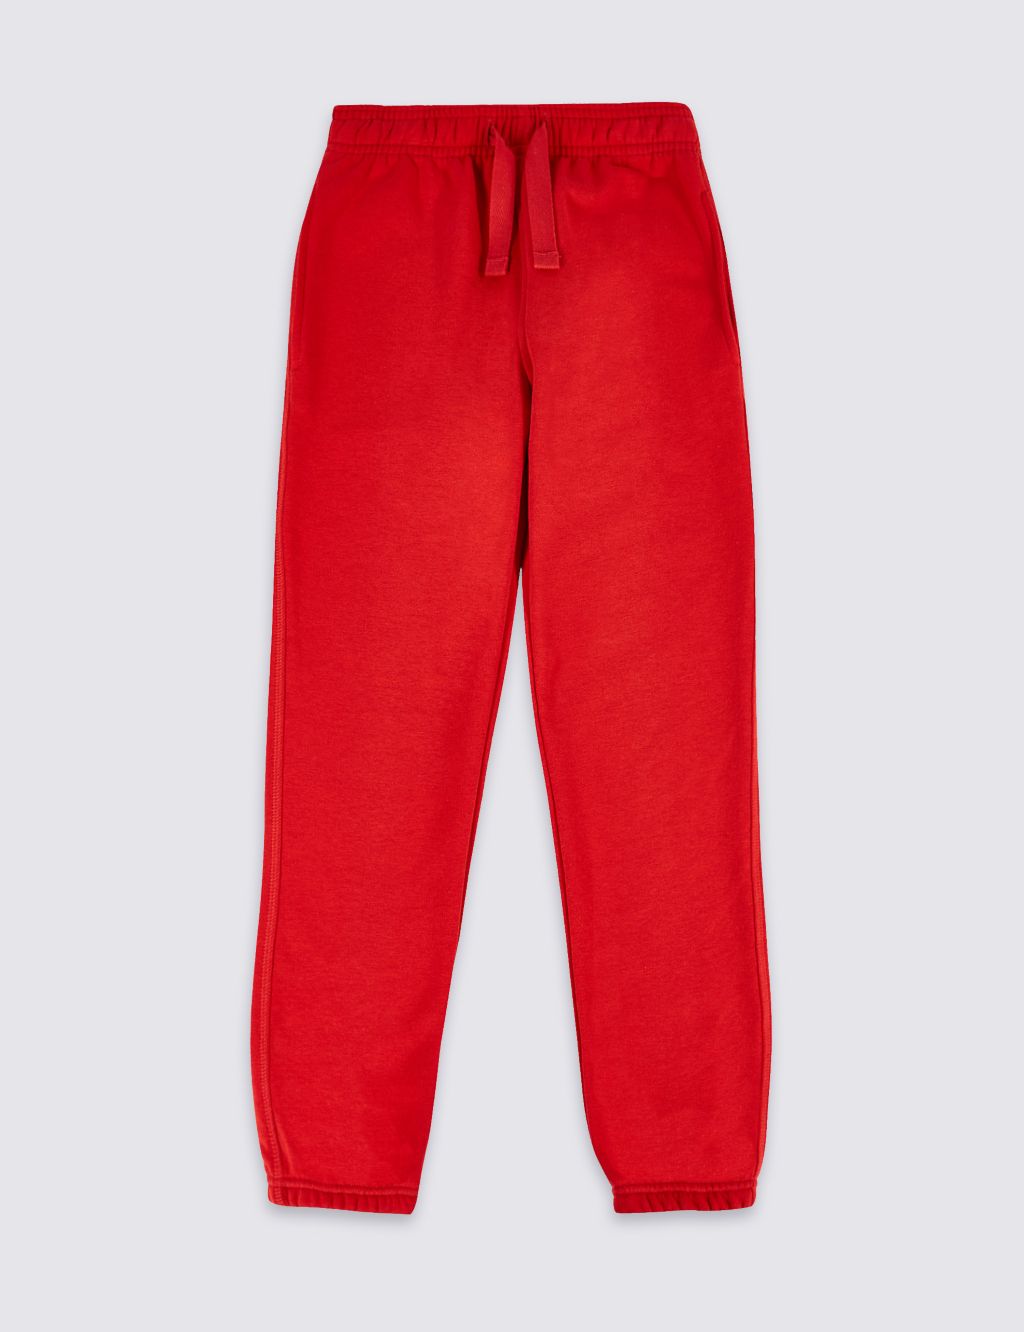 Girls Bright Red Oversized Joggers, Girls Joggers